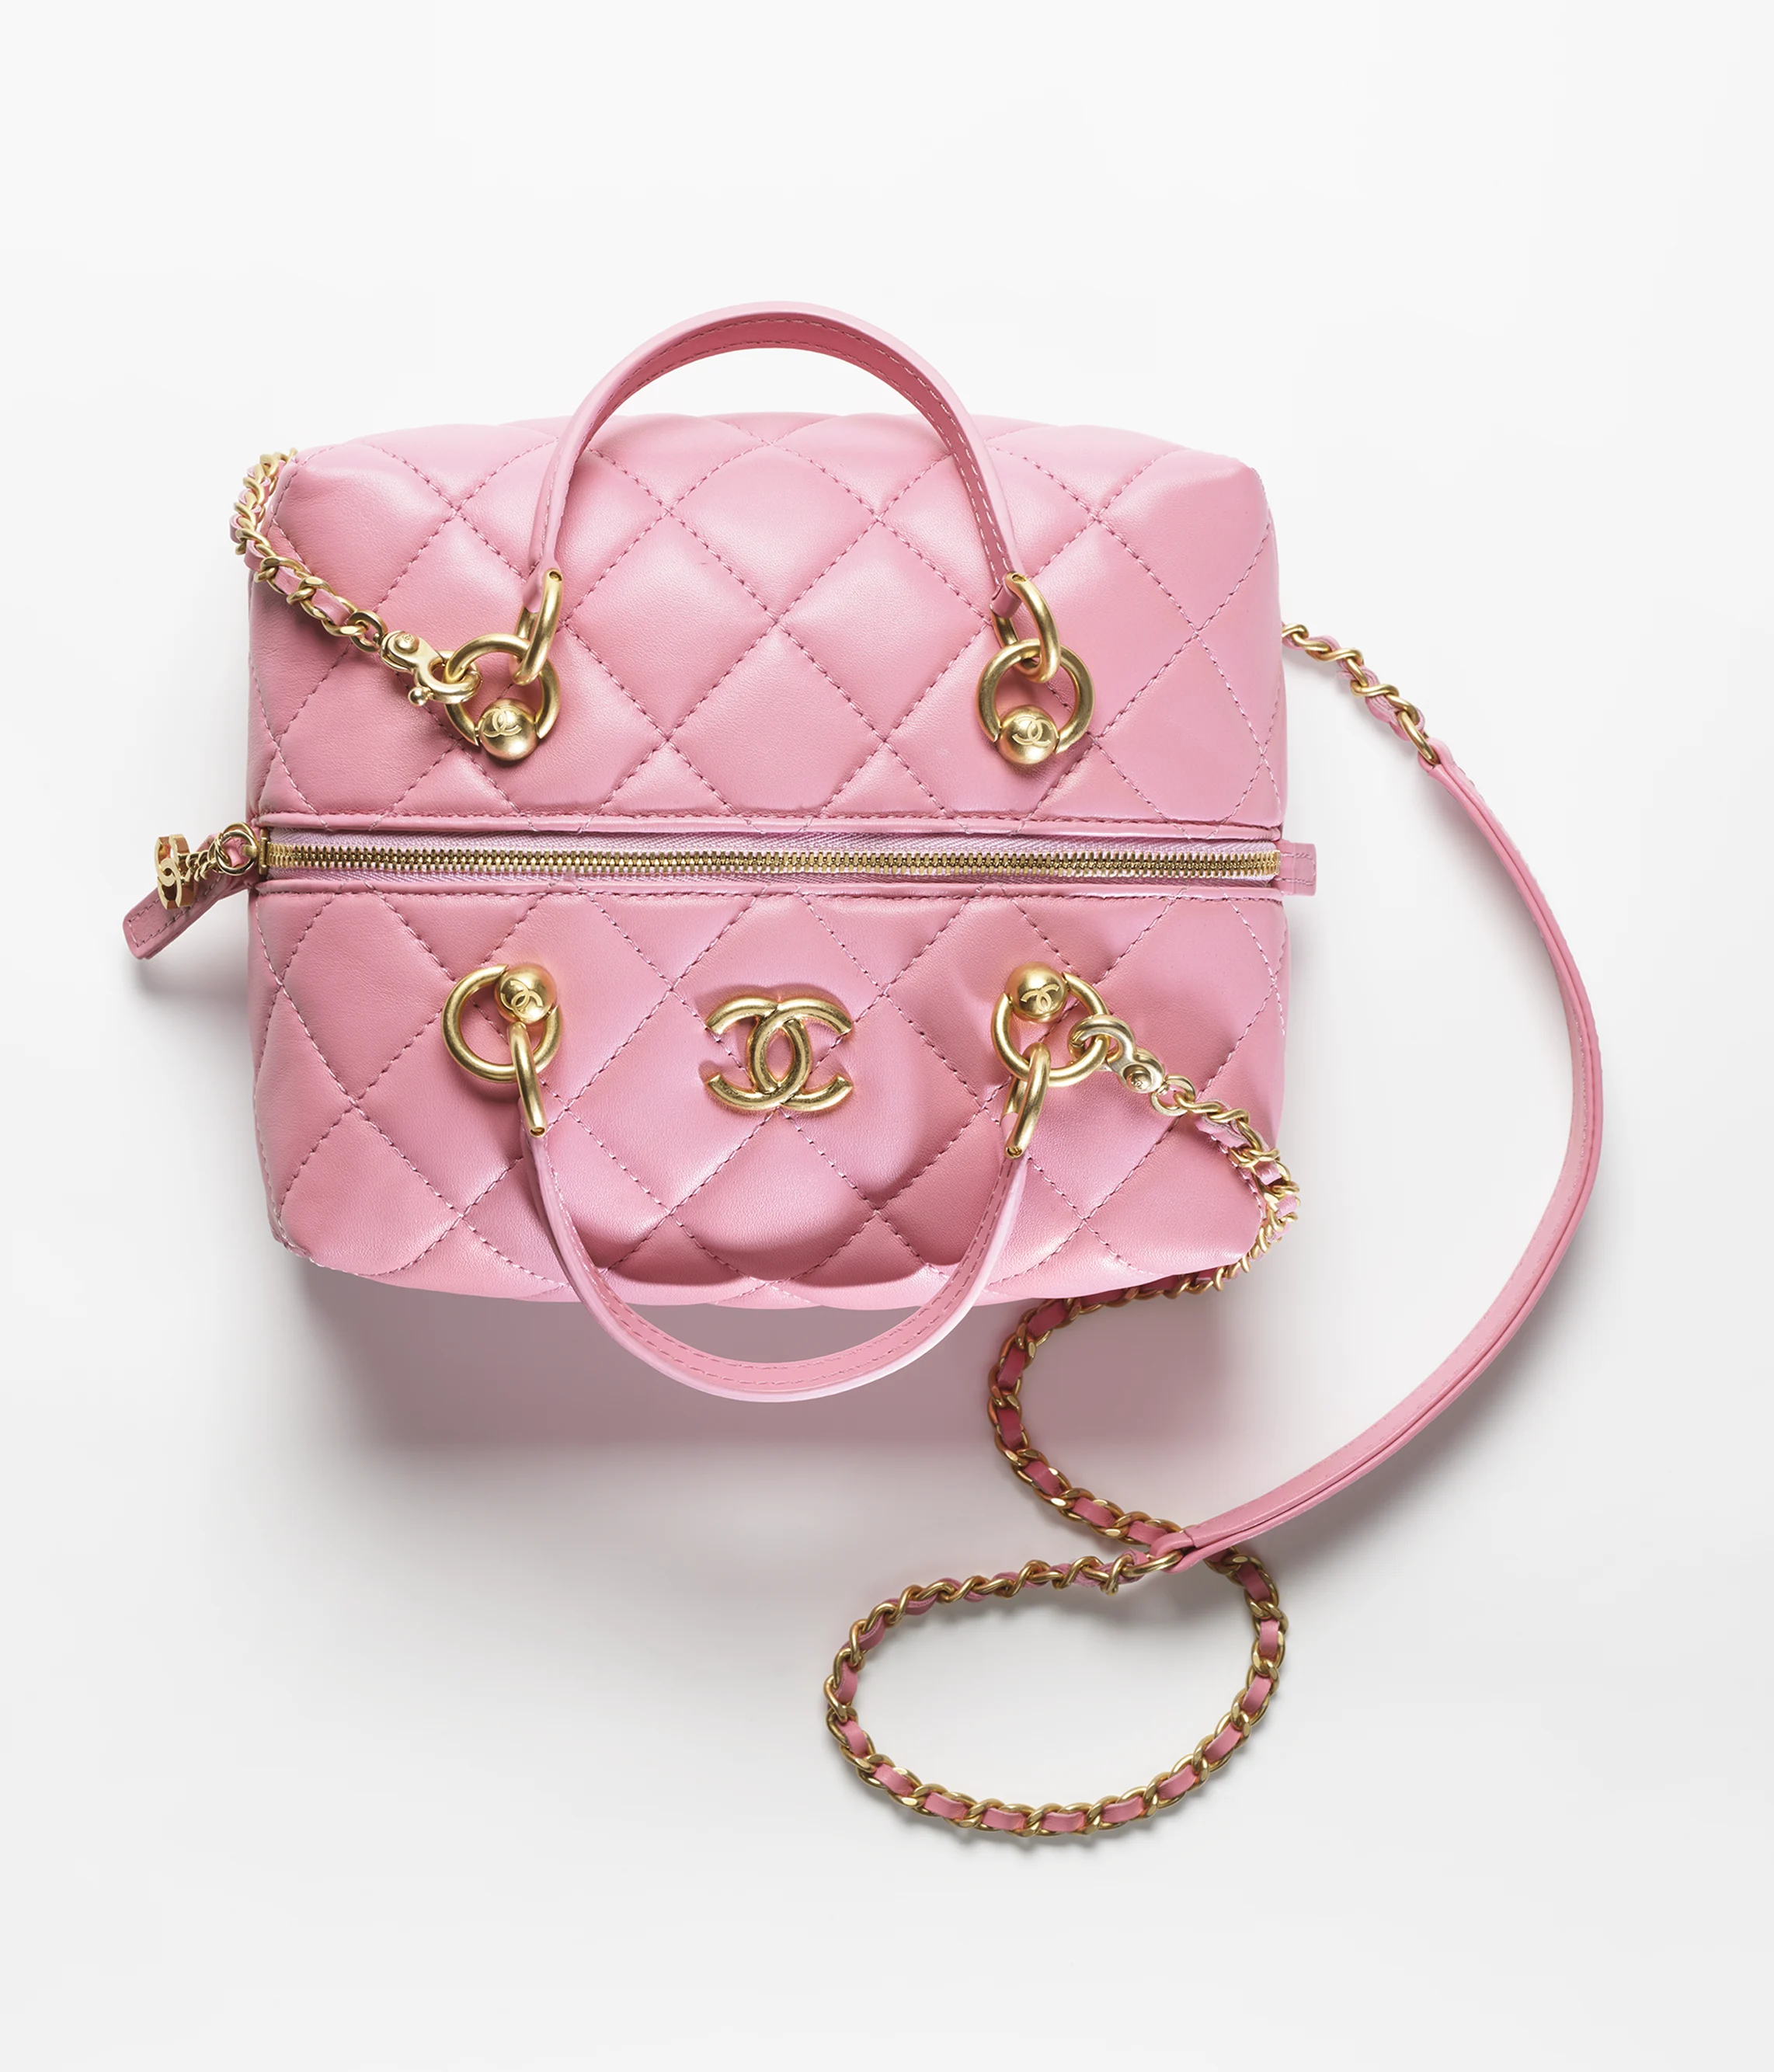 Chanel Bag with Top Handle Pink